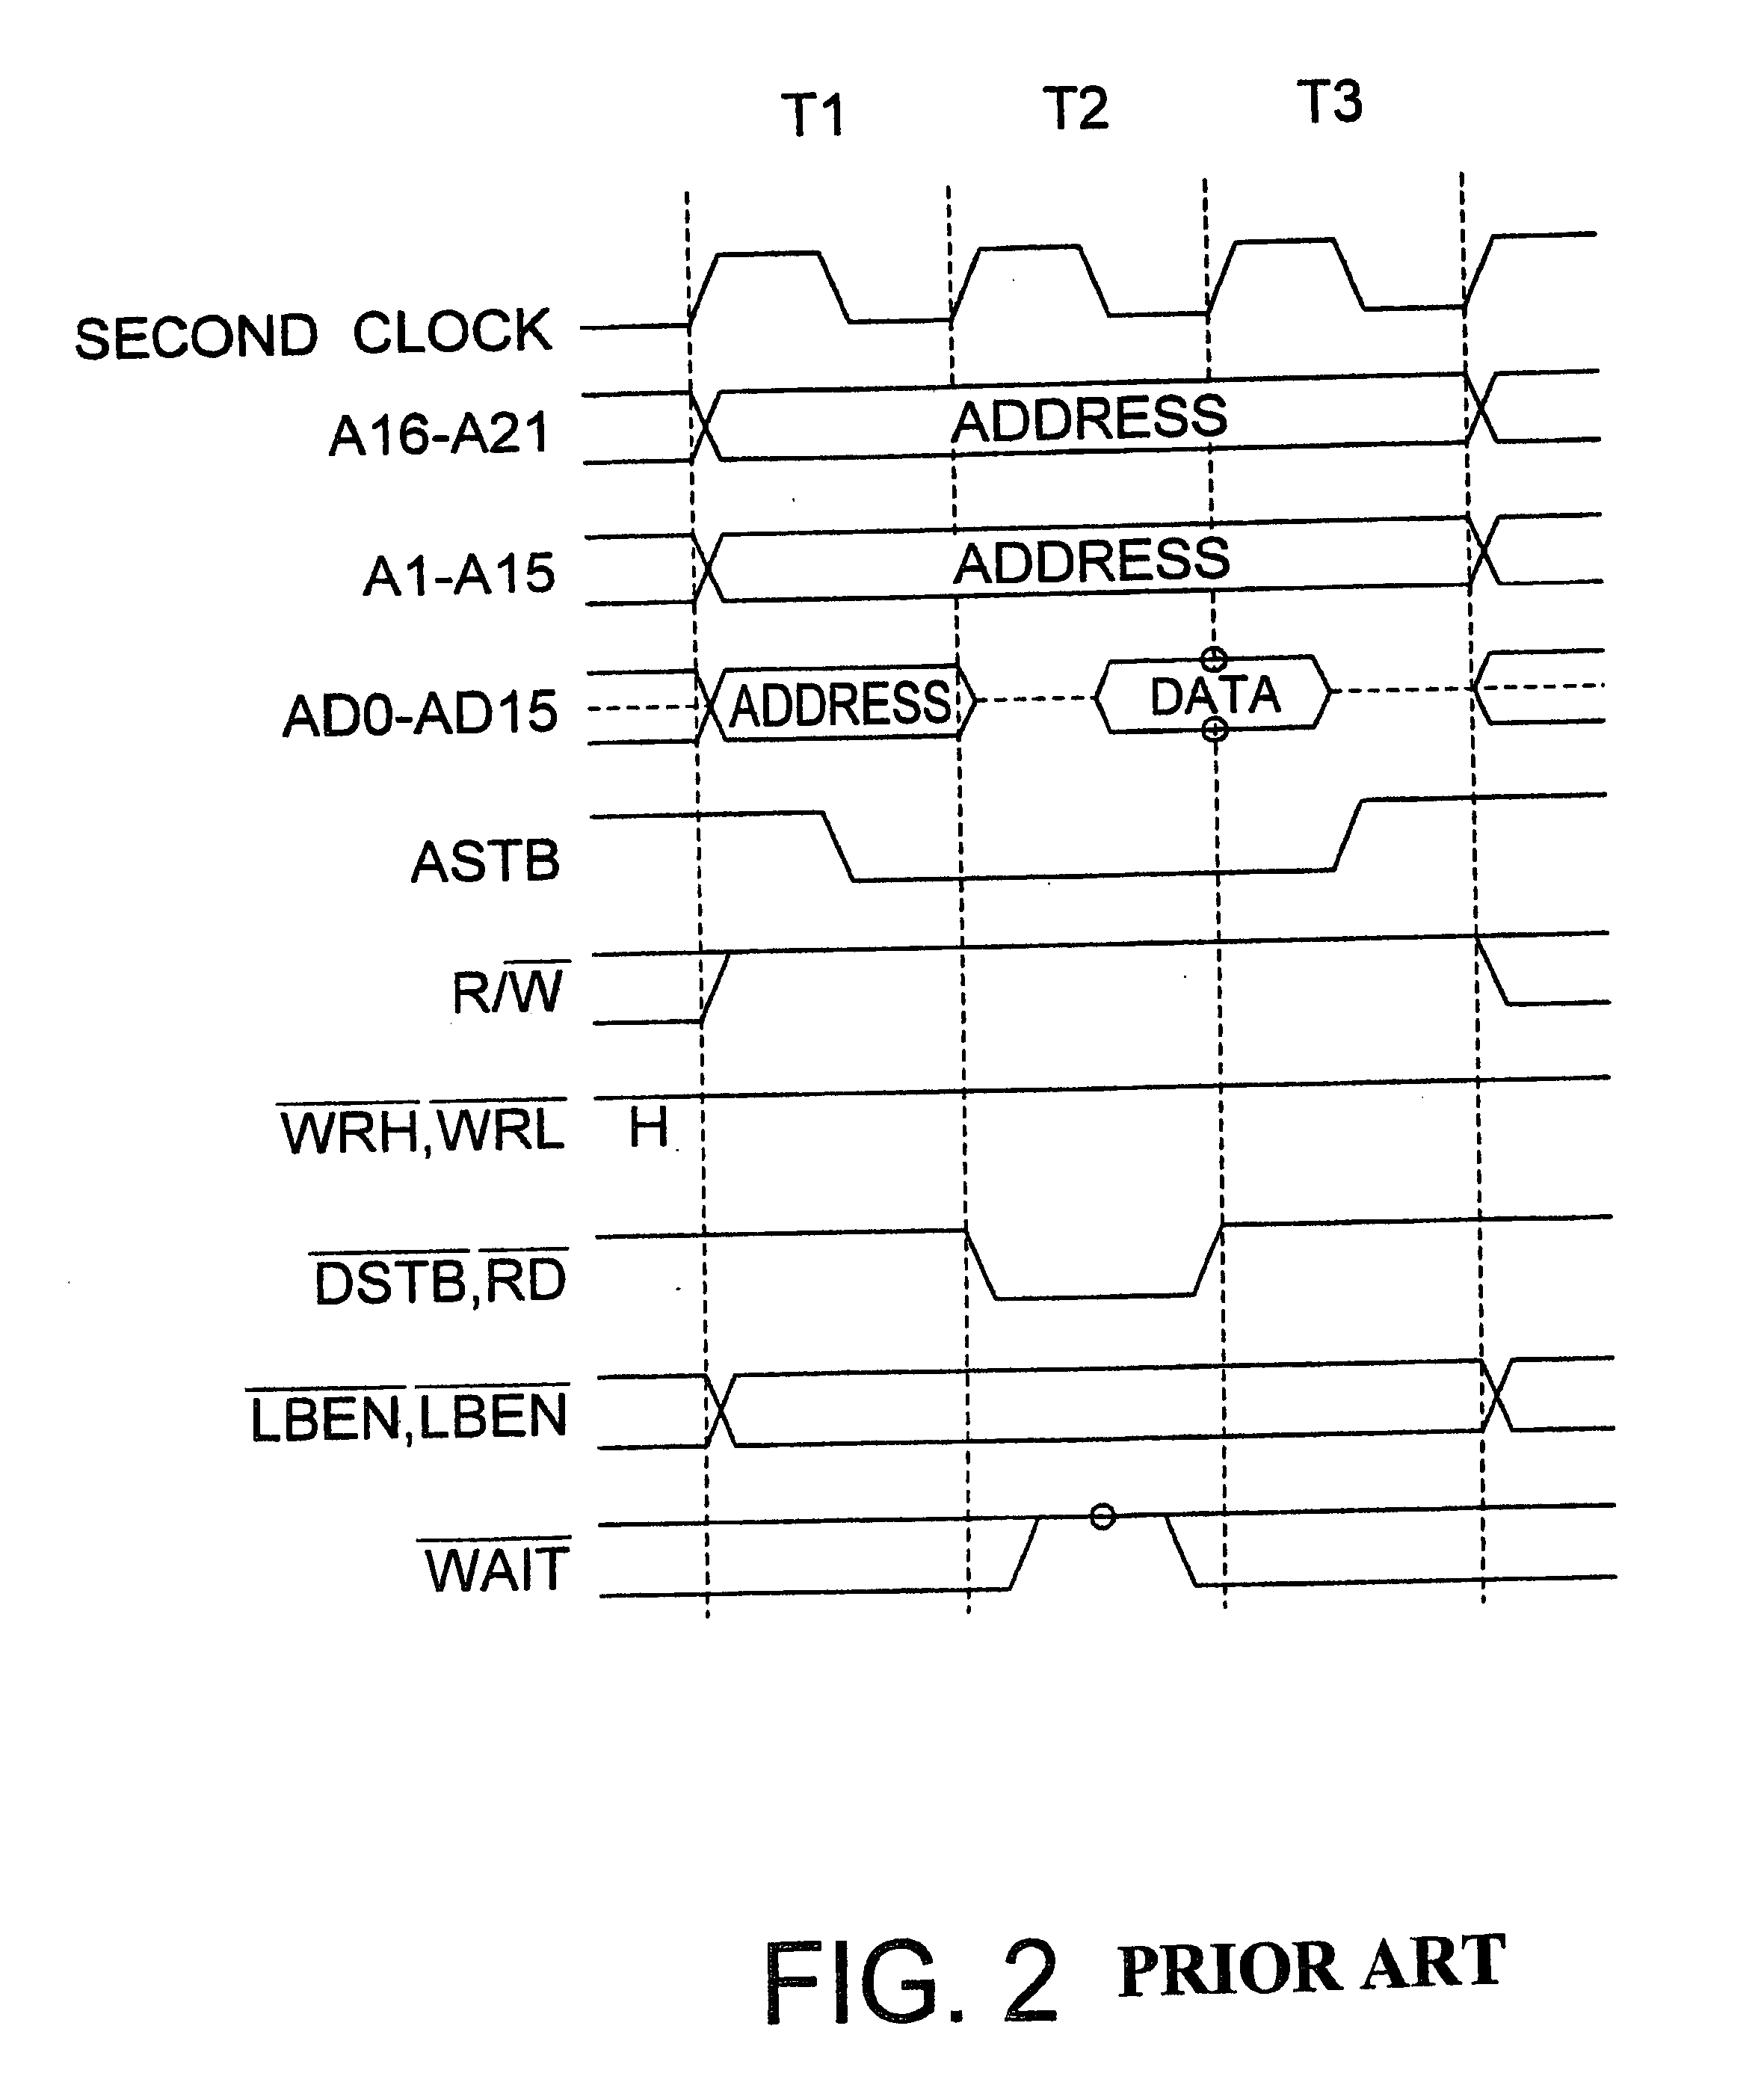 Synchronous signal processing system